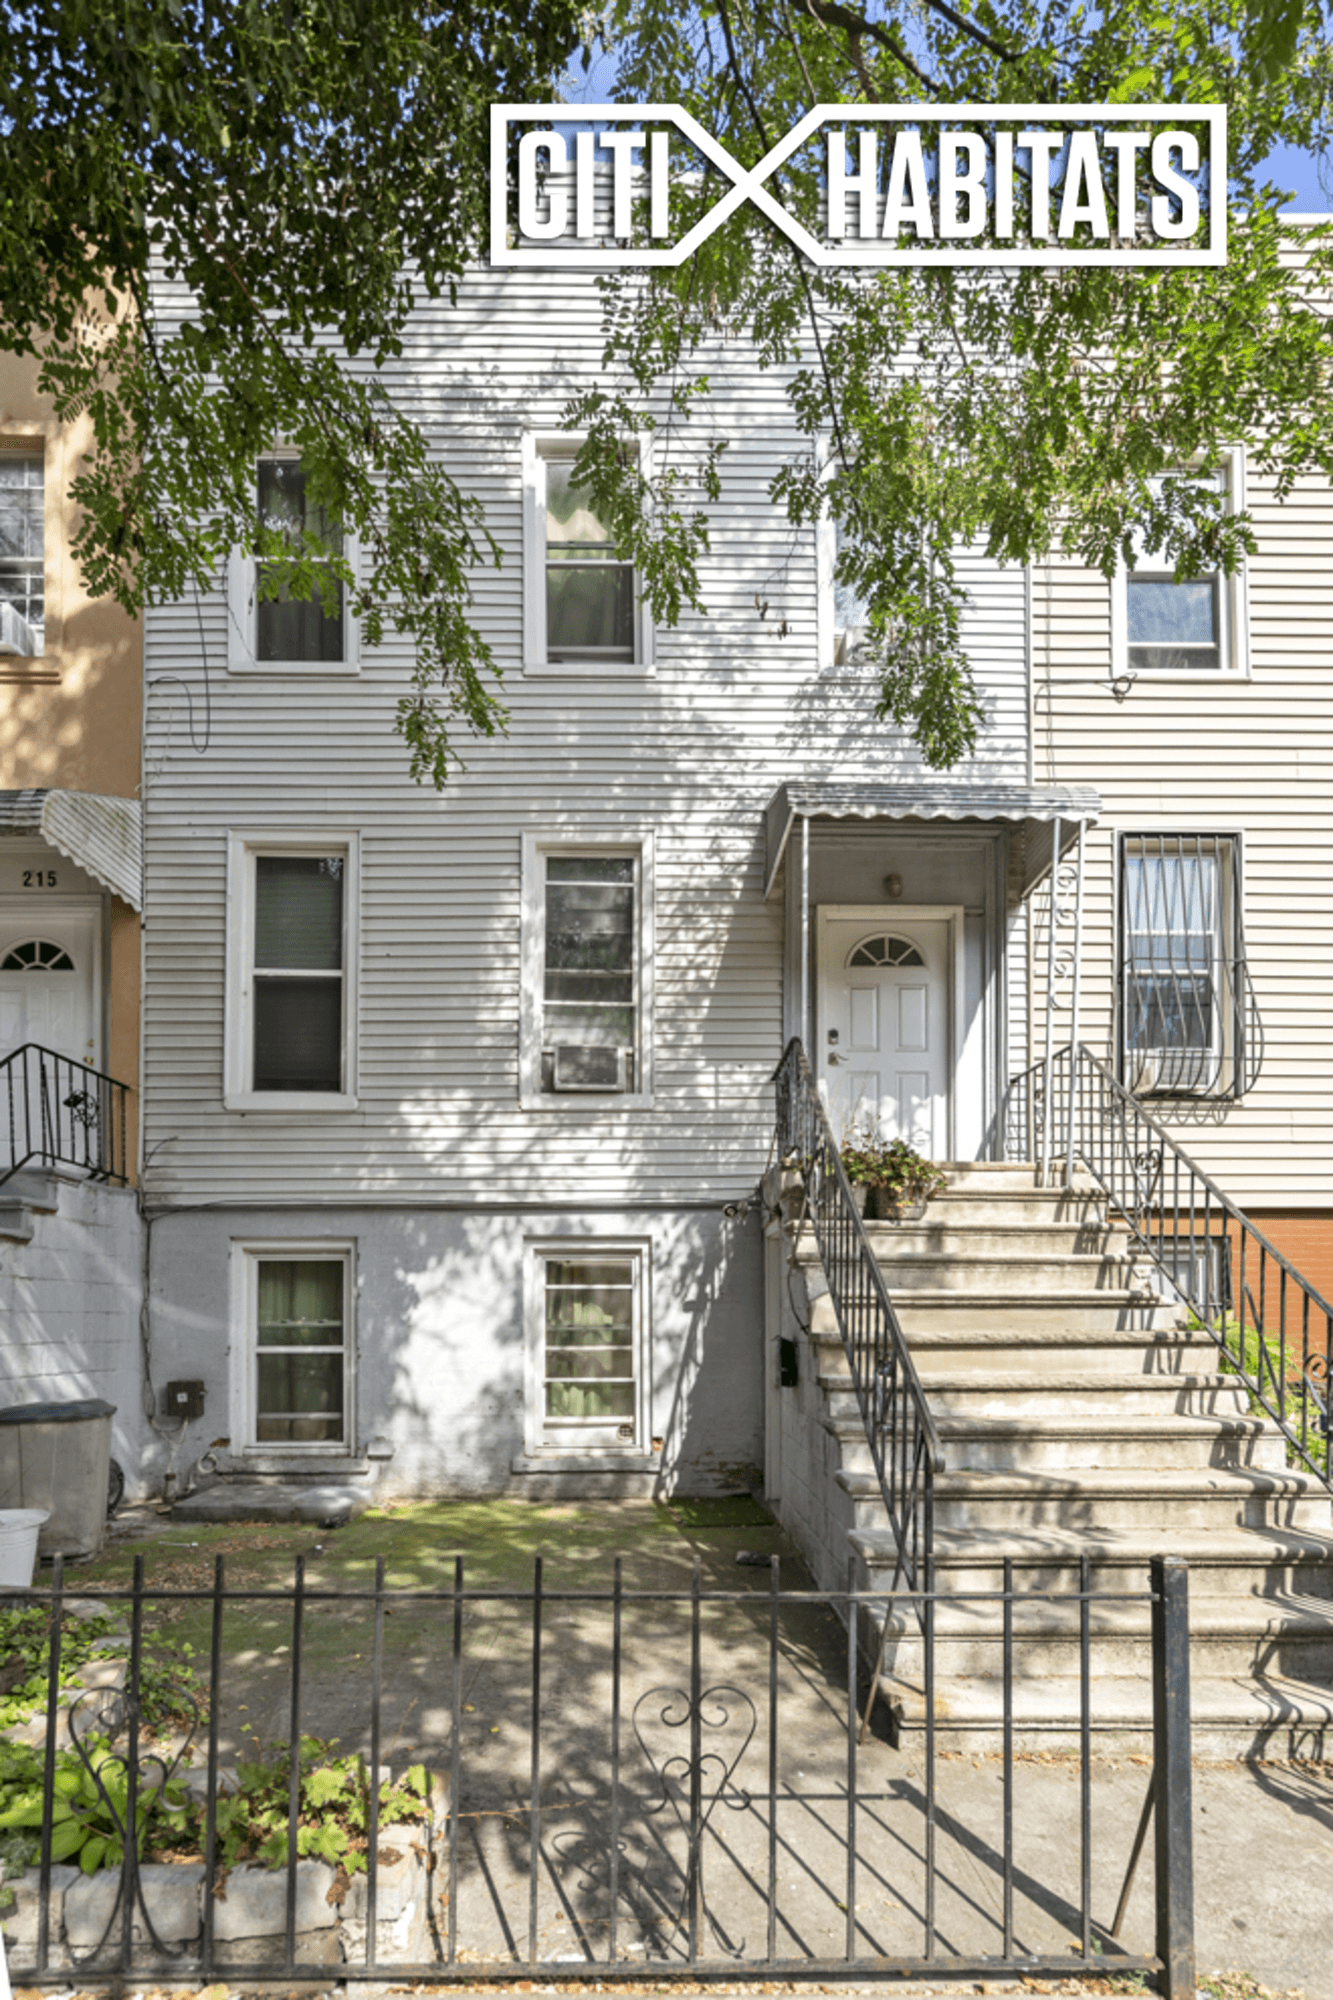 2 Family Home for Sale located on a tree line street in Bushwick.